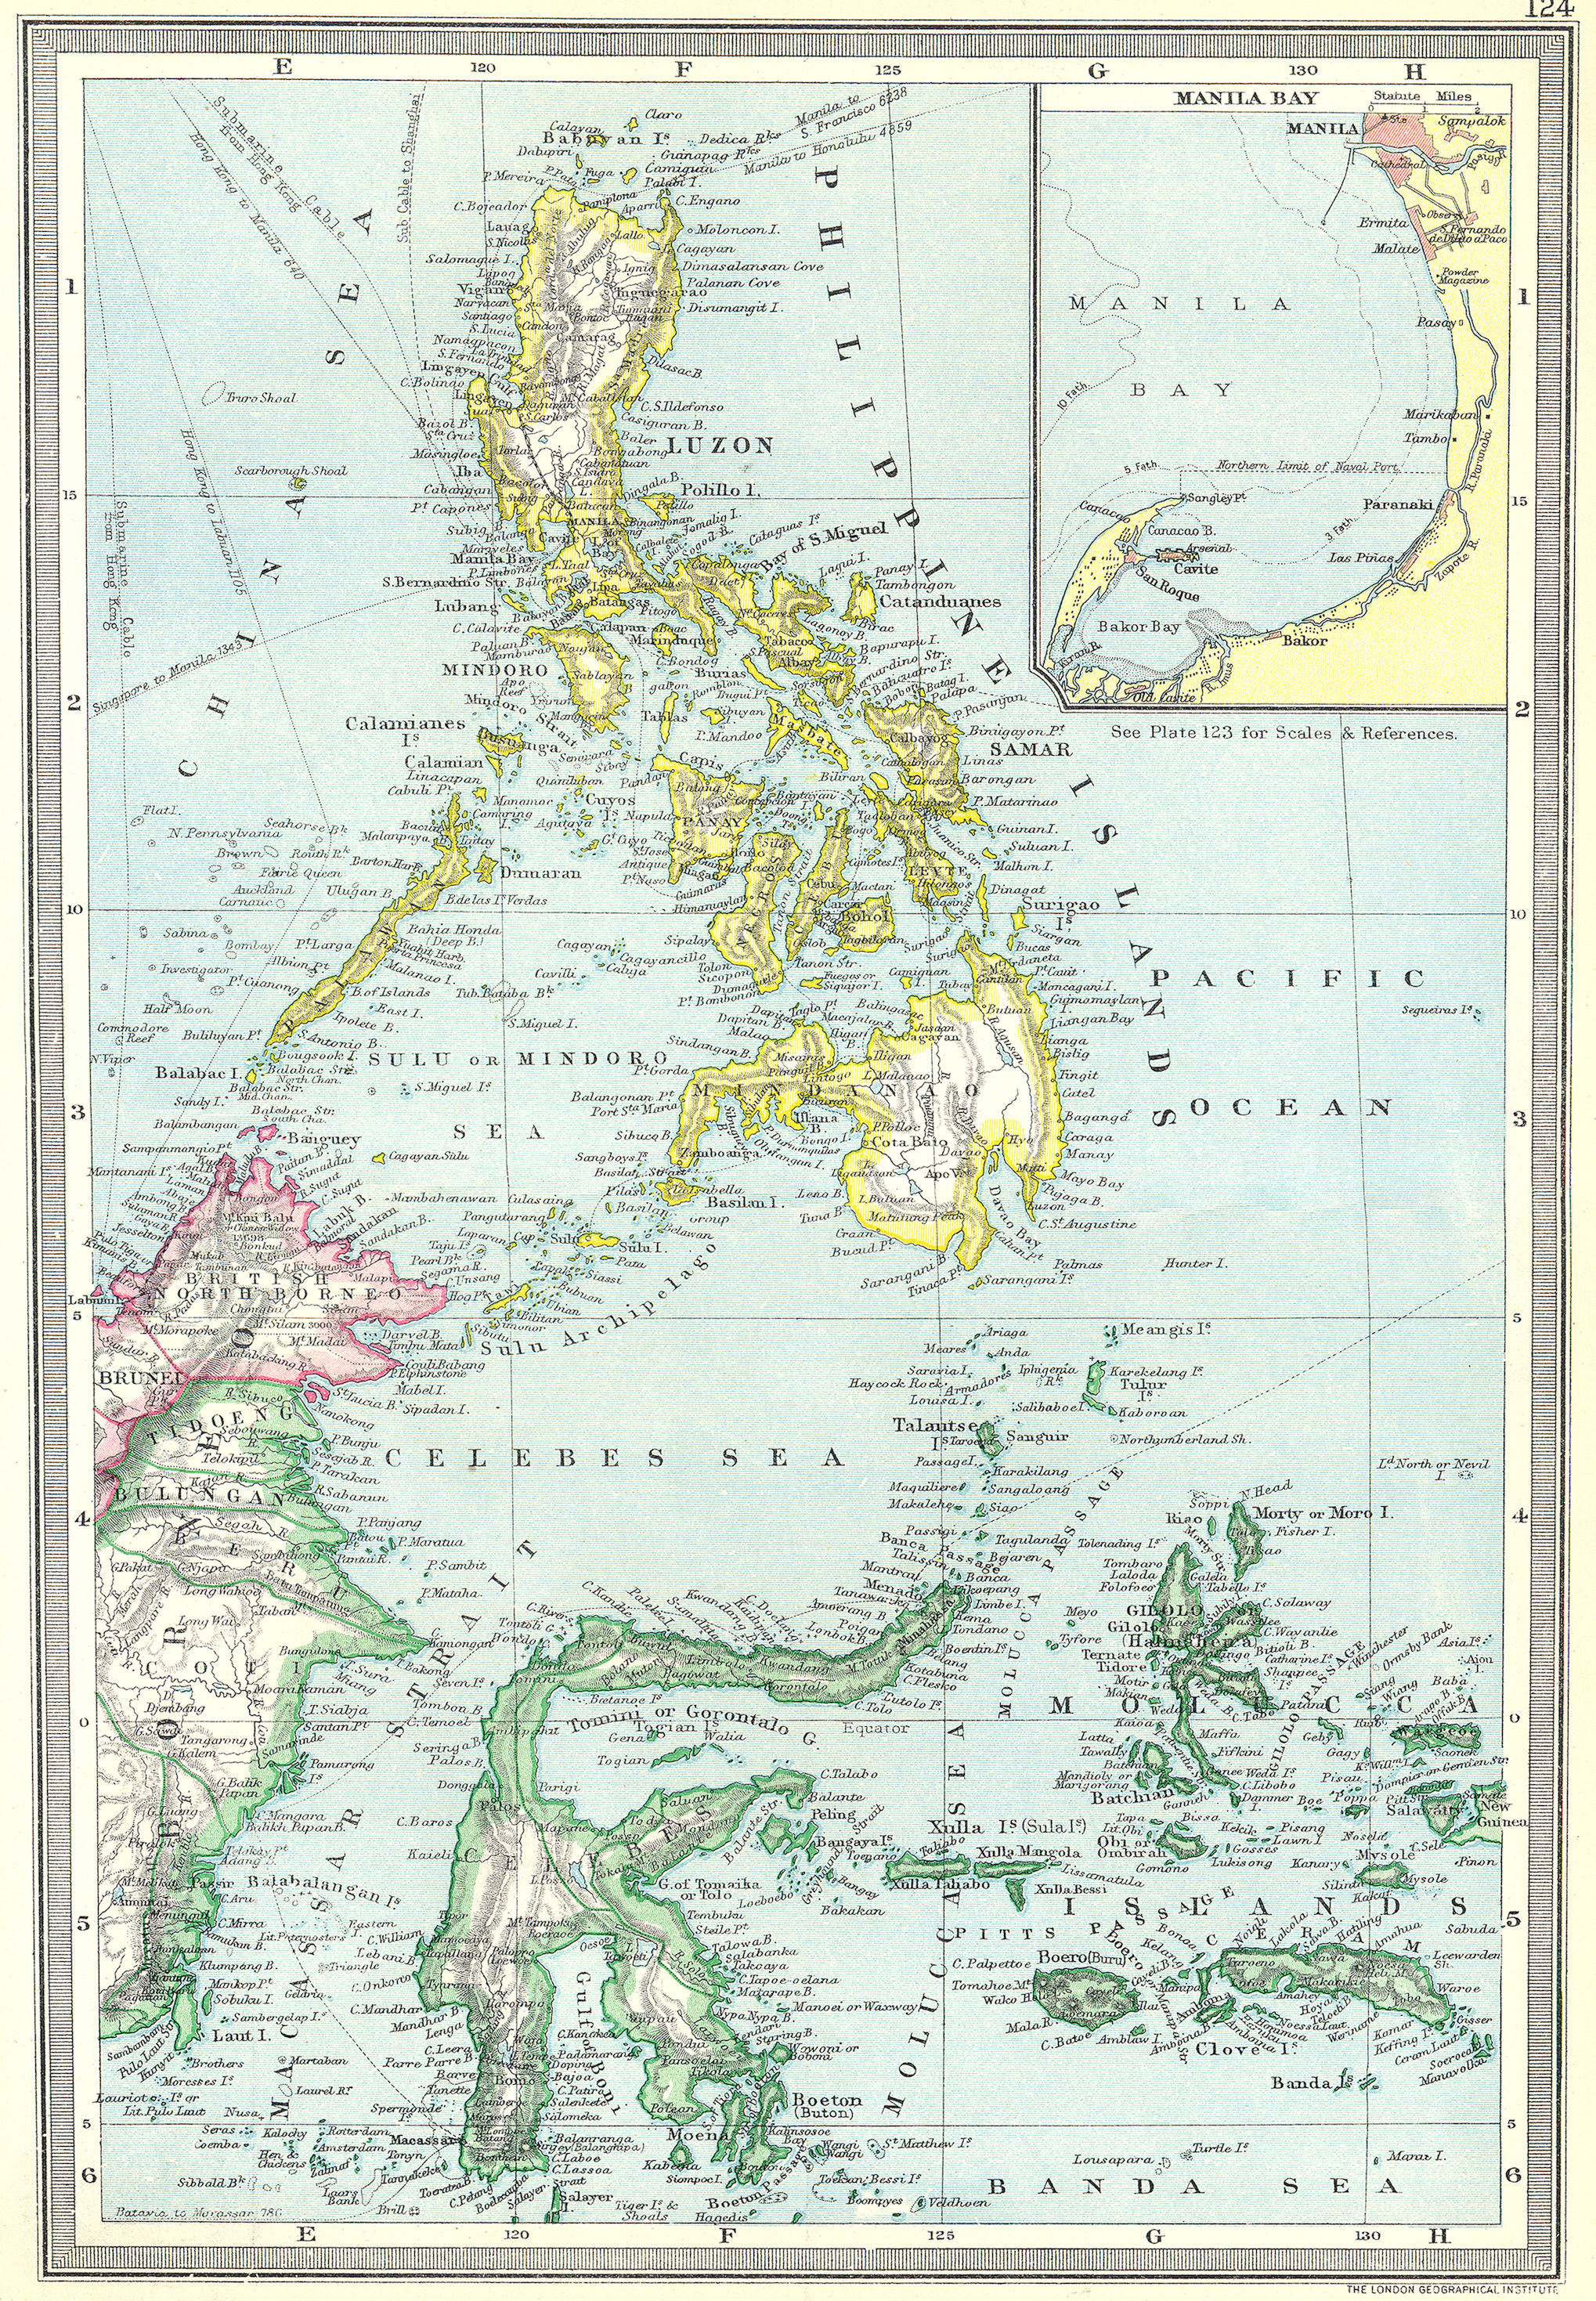 Associate Product PHILIPPINES. Philippine Islands; map of Manila Bay 1907 old antique chart